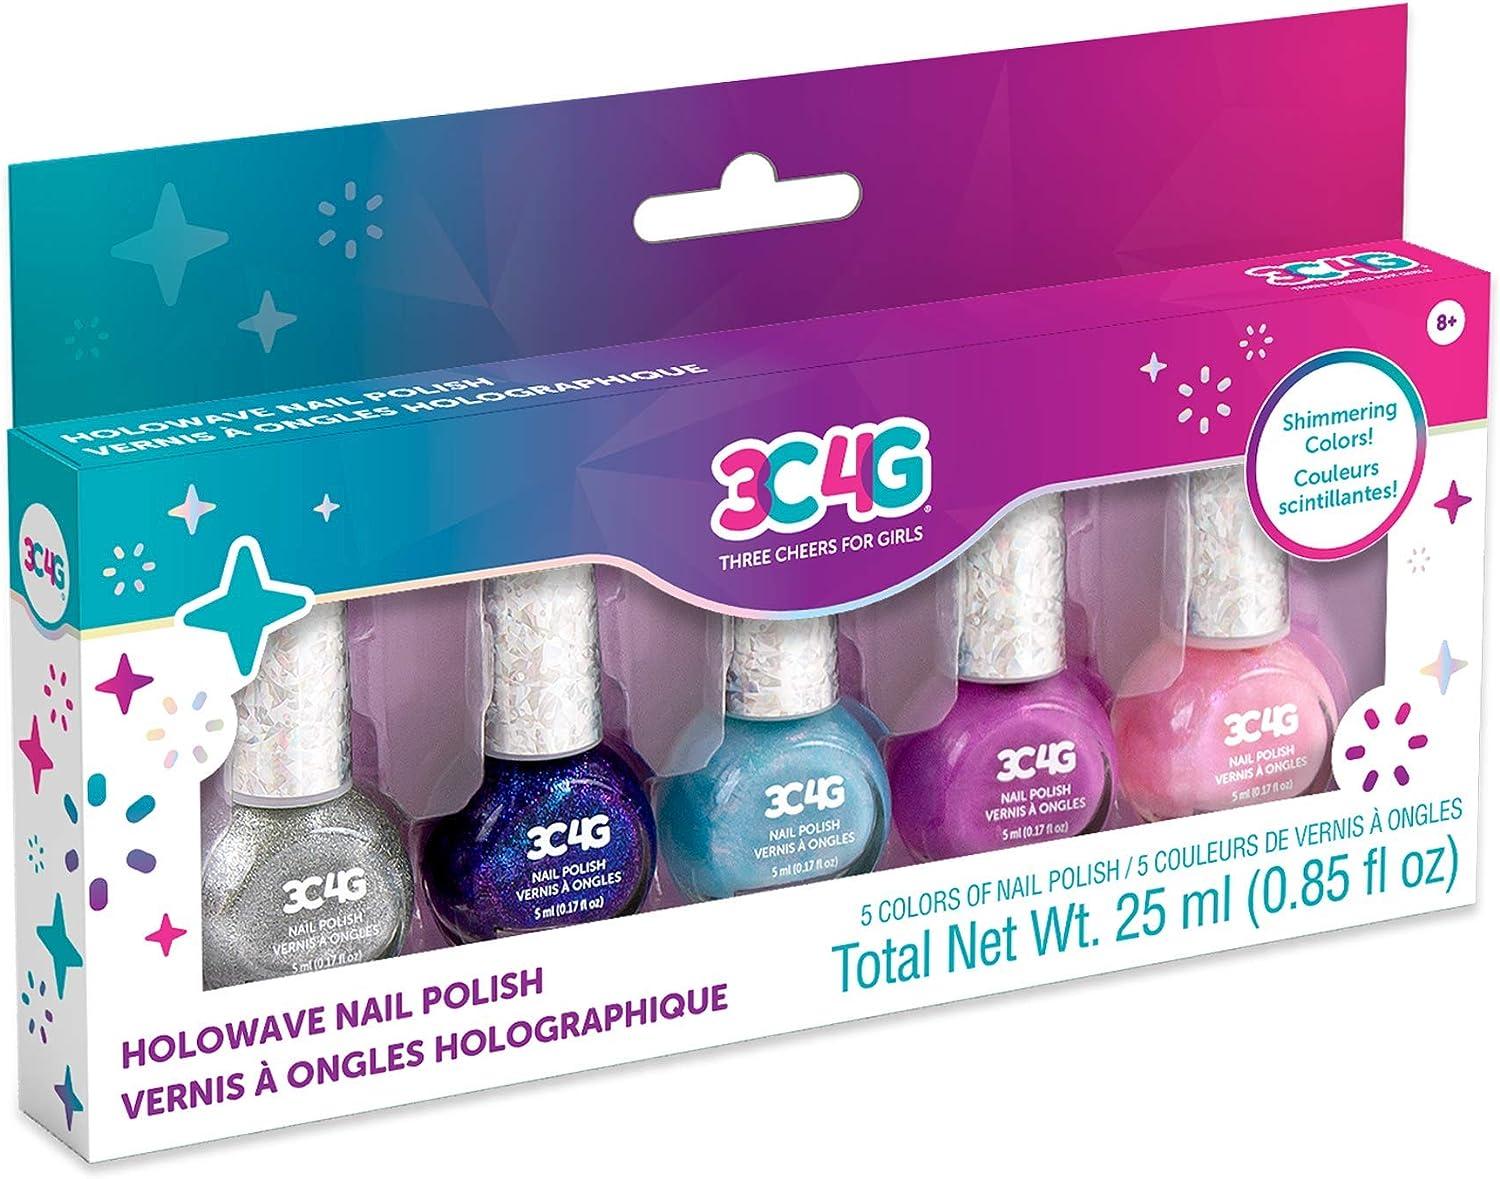 3C4G: Butterfly Glitter Nail Polish Set - 5 Bottles, Make It Real, Tweens &  Girls, Non-Toxic Long-Lasting Polish, Fluttering Shades, Pinks Blue &  Silver, Three Cheers For Girls, Kids Ages 8+ -